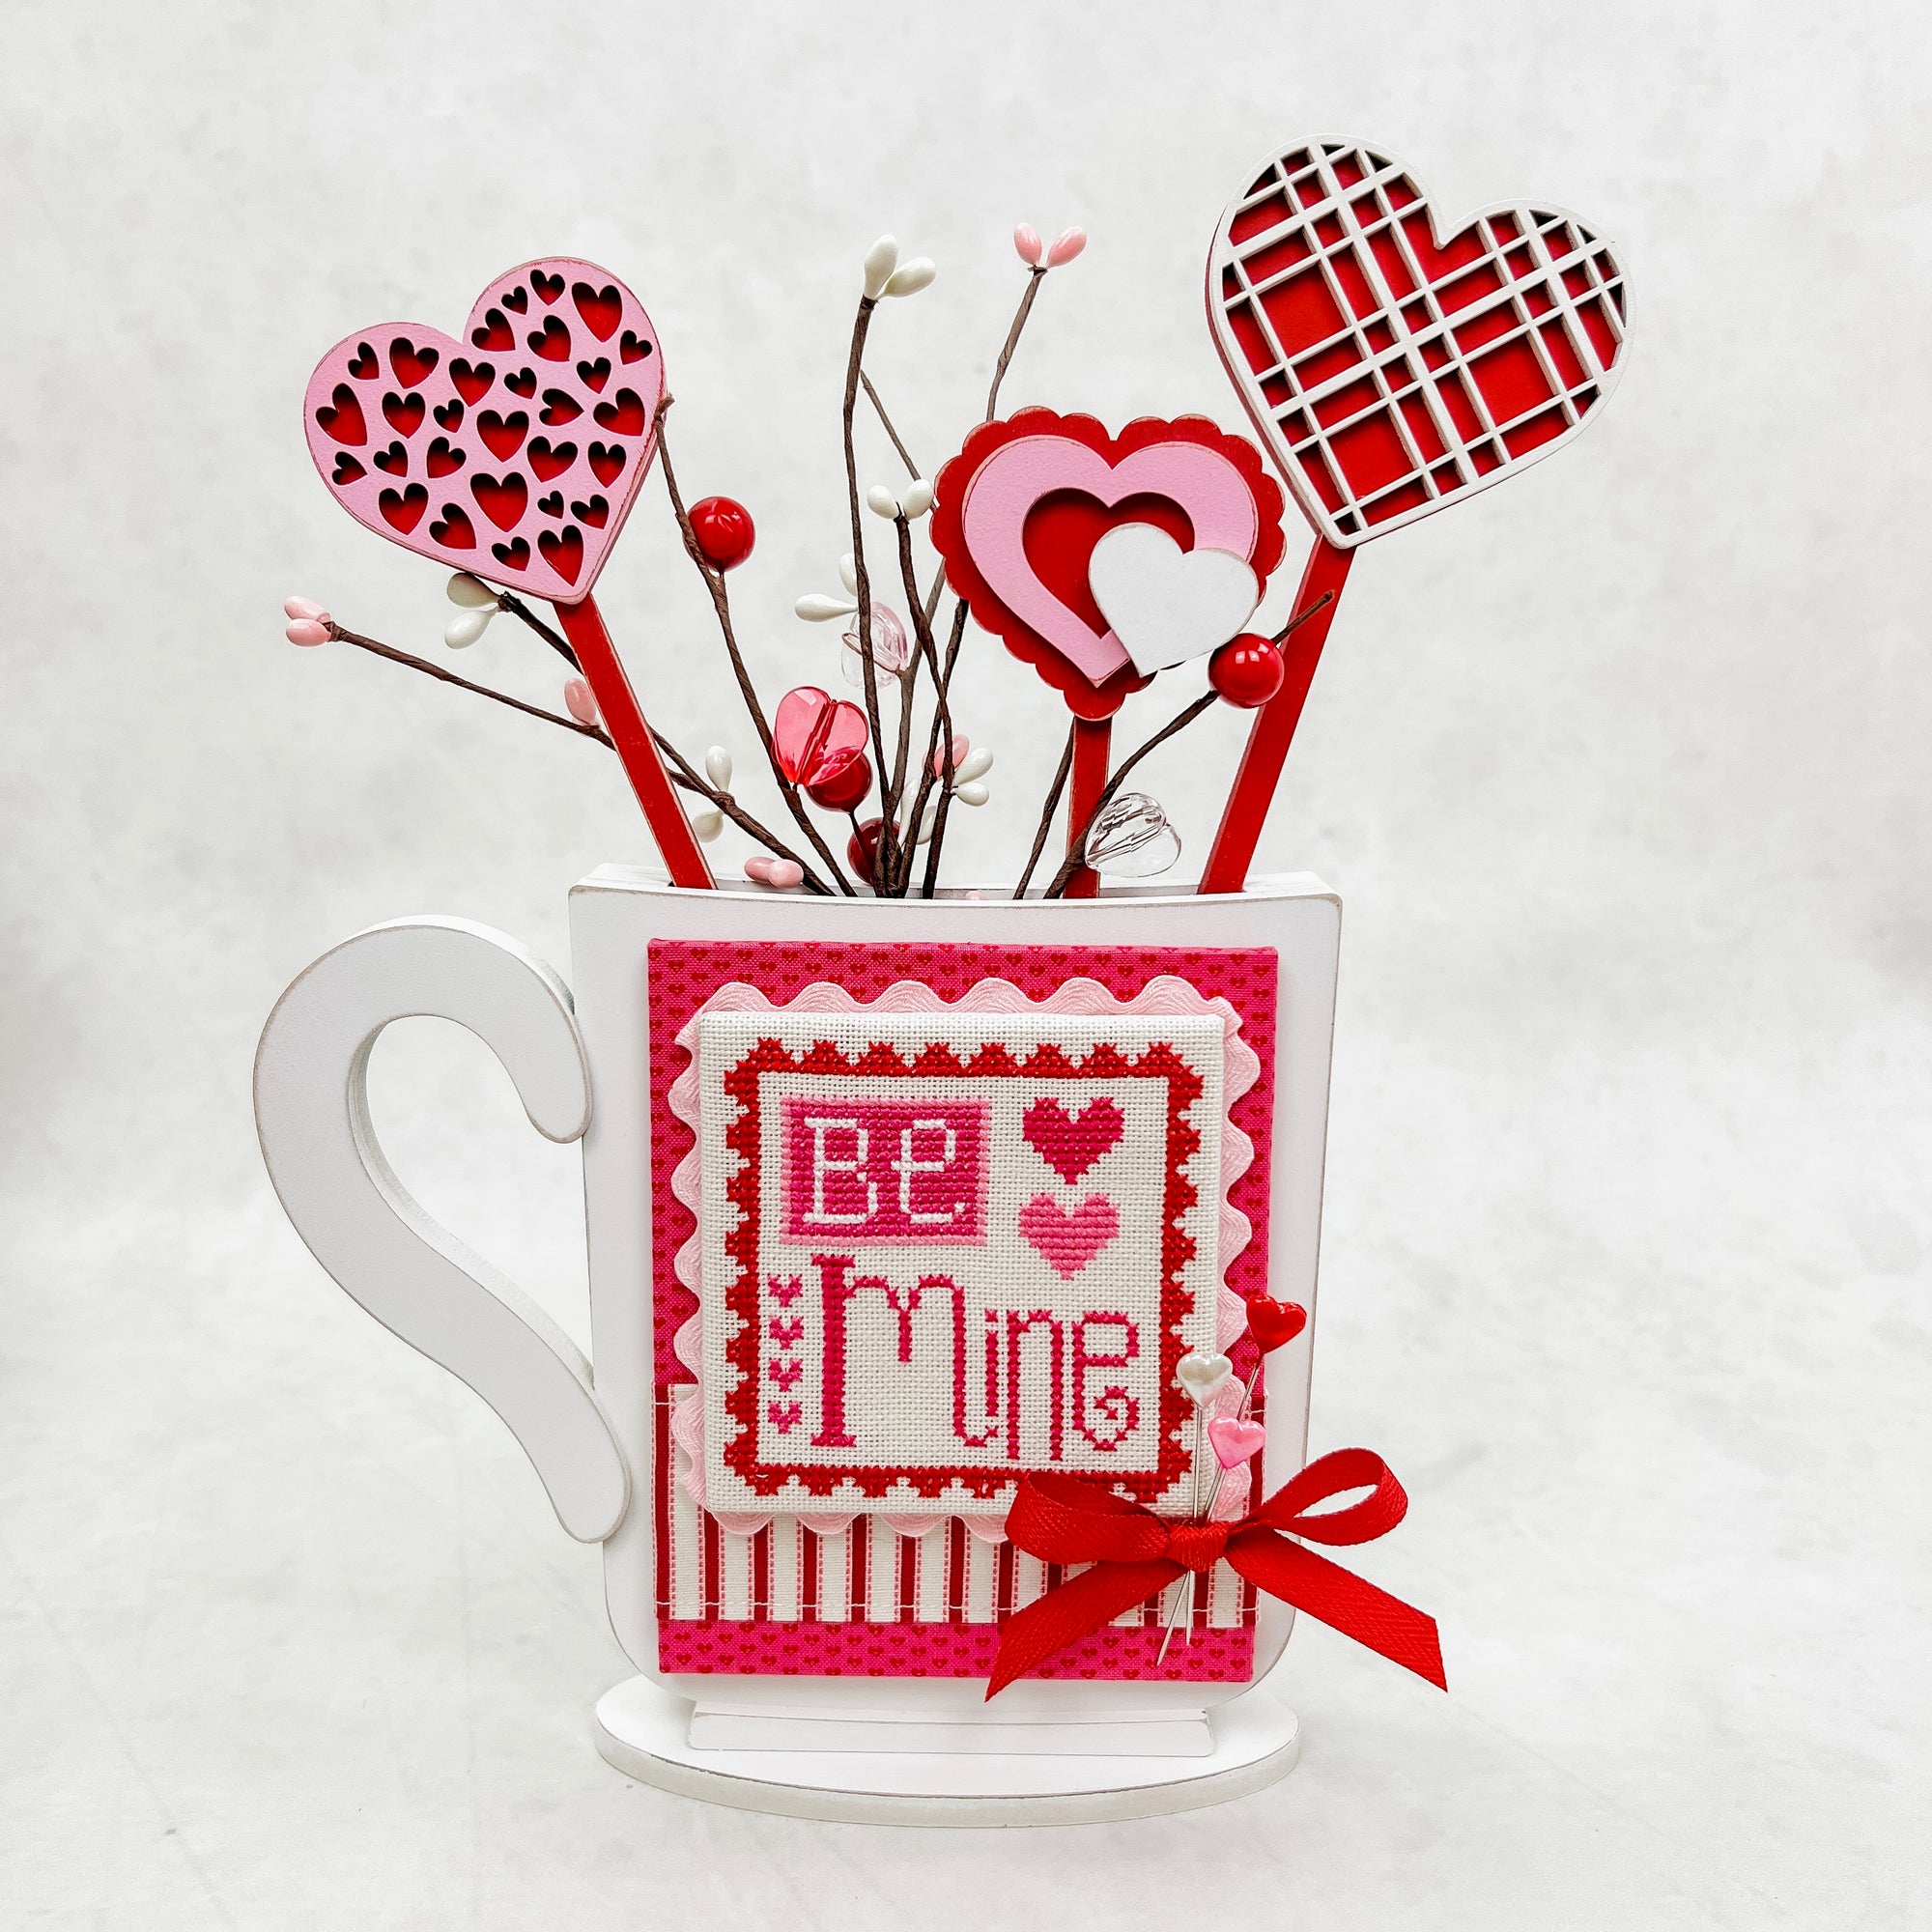 Valentine mug wood cross stitch display with red hearts on sticks. For displaying finished cross stitch pieces.